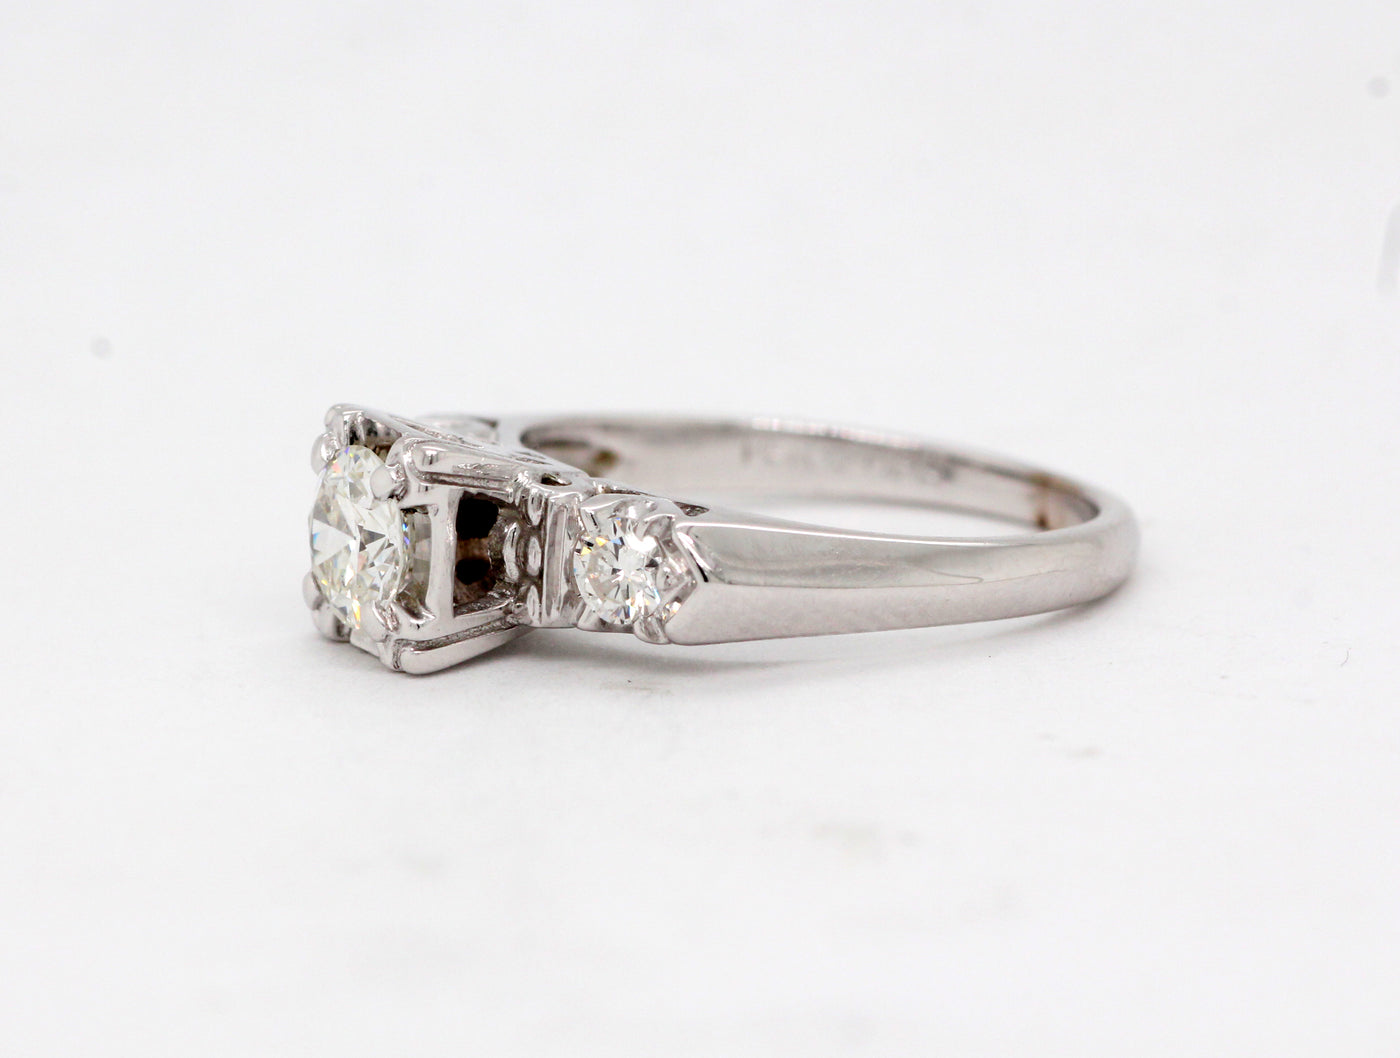 Estate 14KW .65 Cttw Diamond 3 Stone Ring H in Color and I1 in clarity